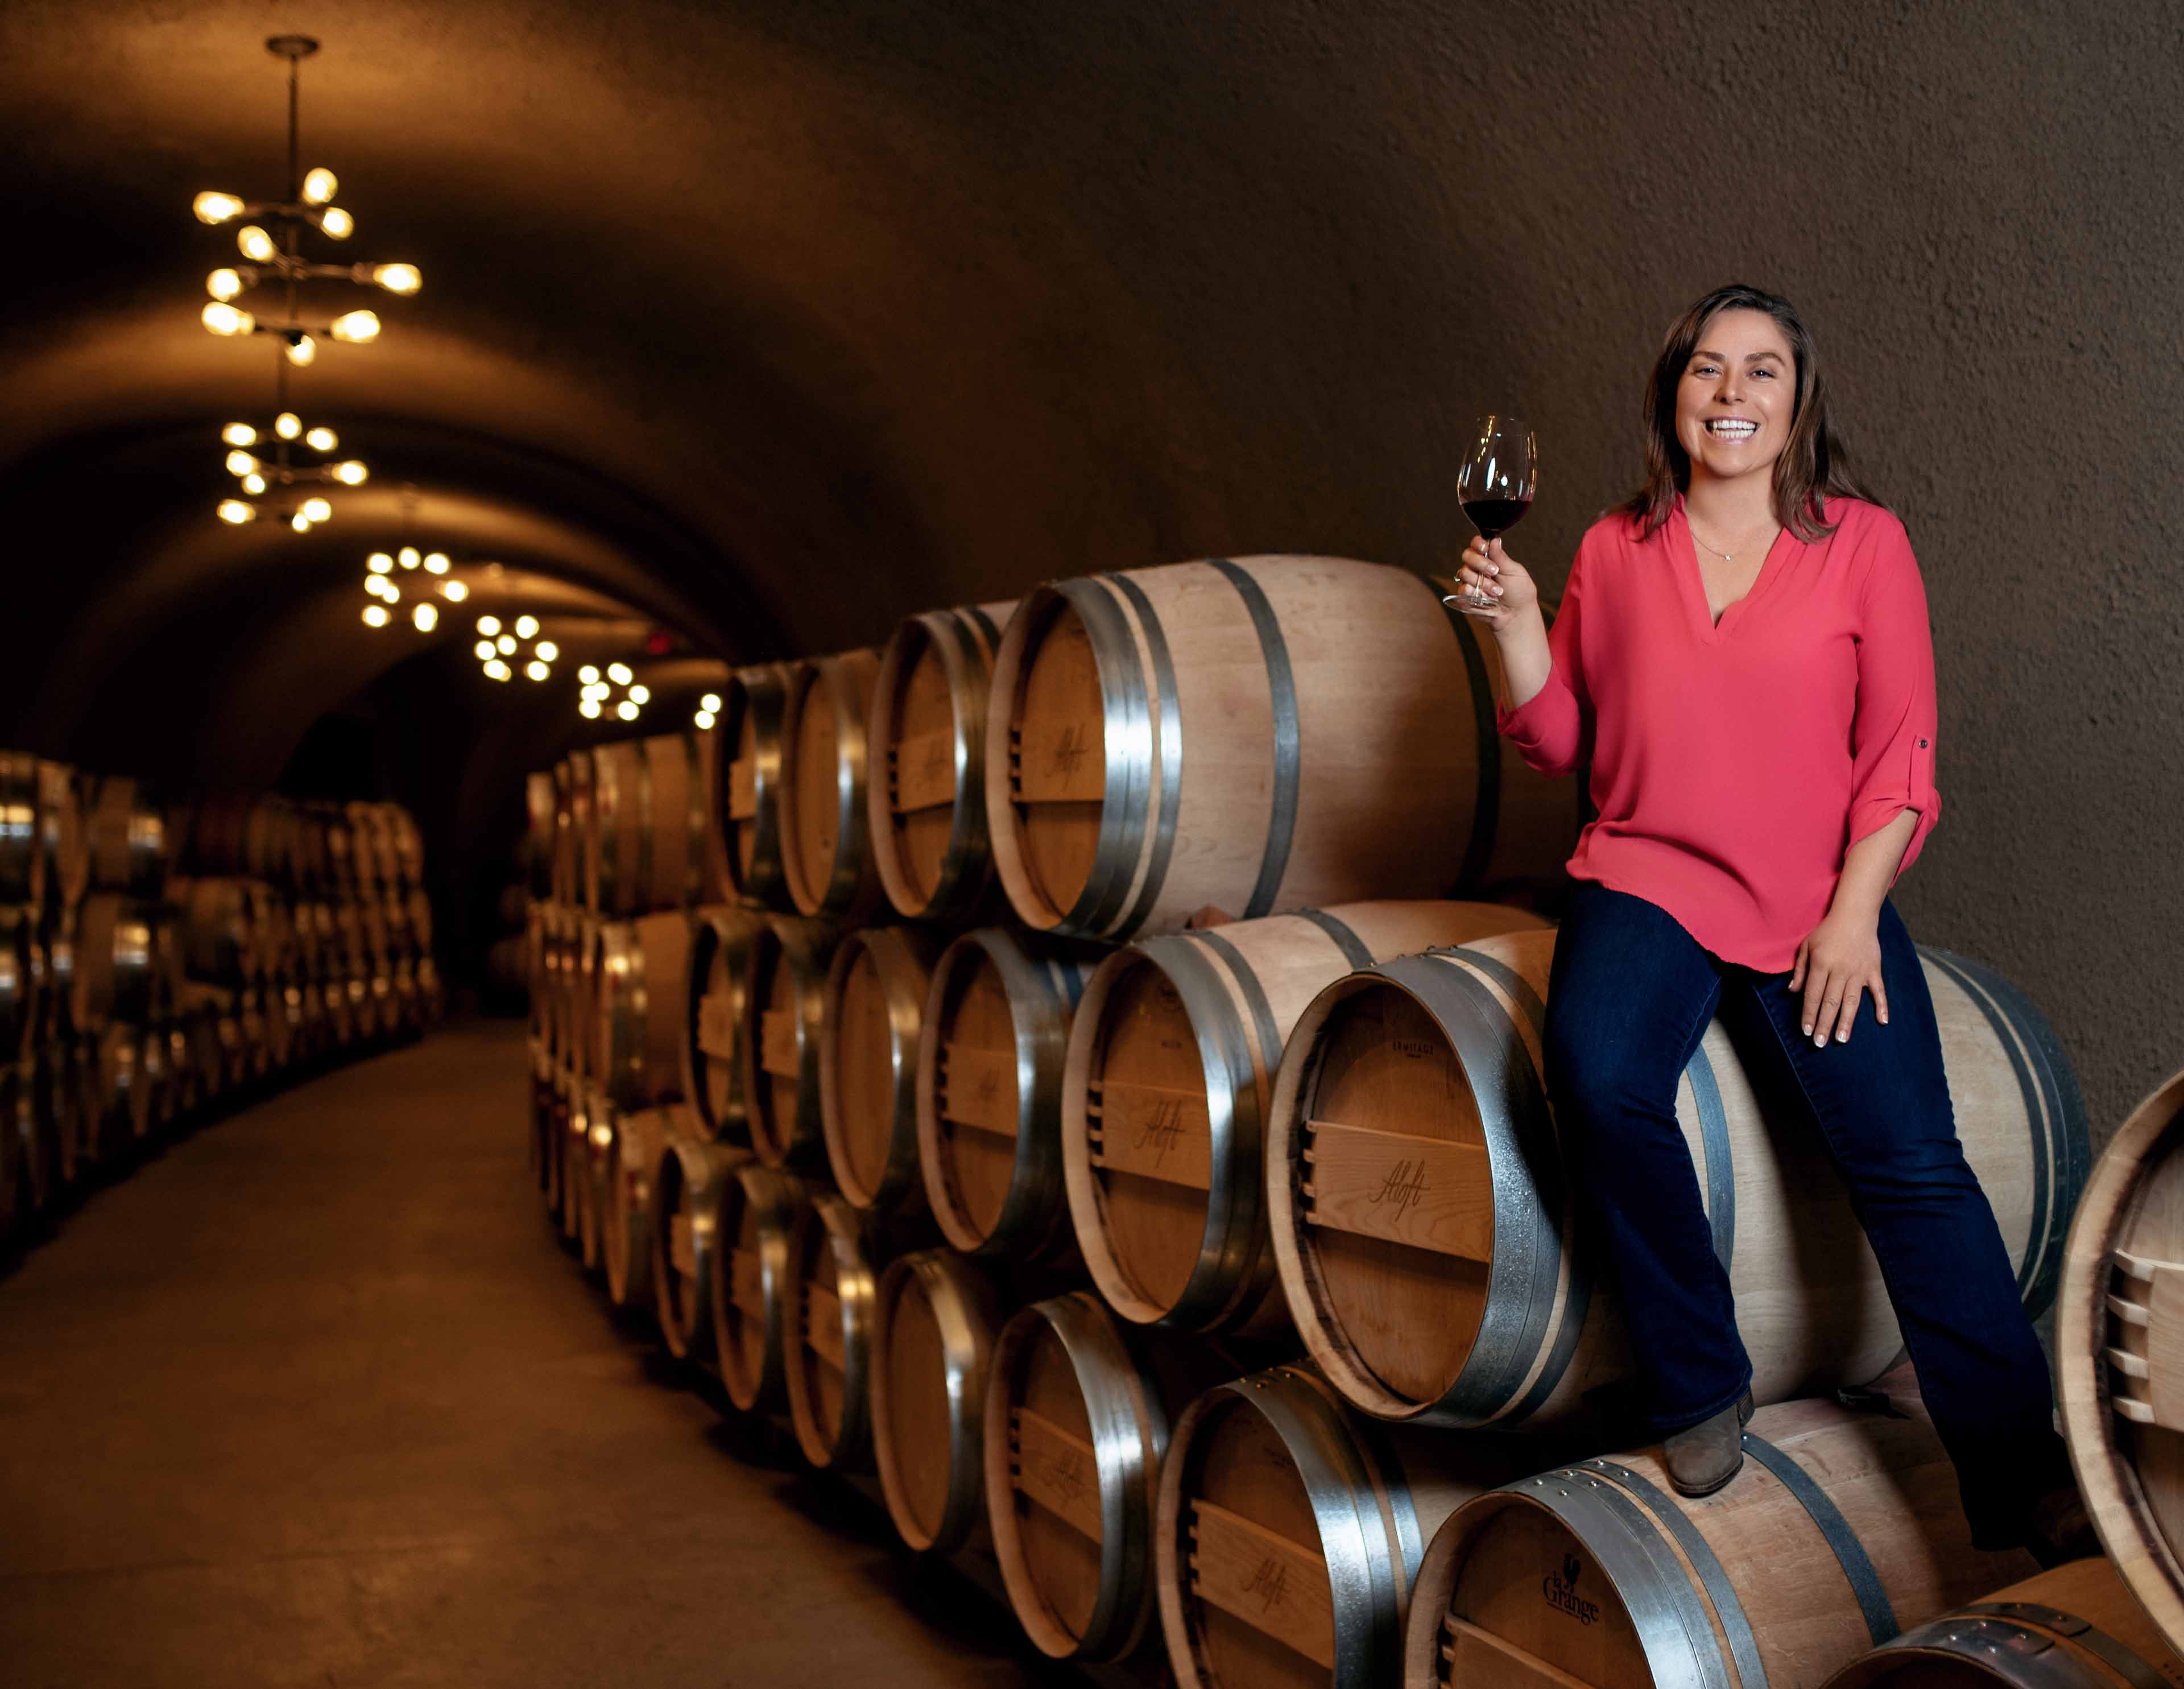 Angelina Mondavi sitting on some wine barrels holding a glass of wine in her hand